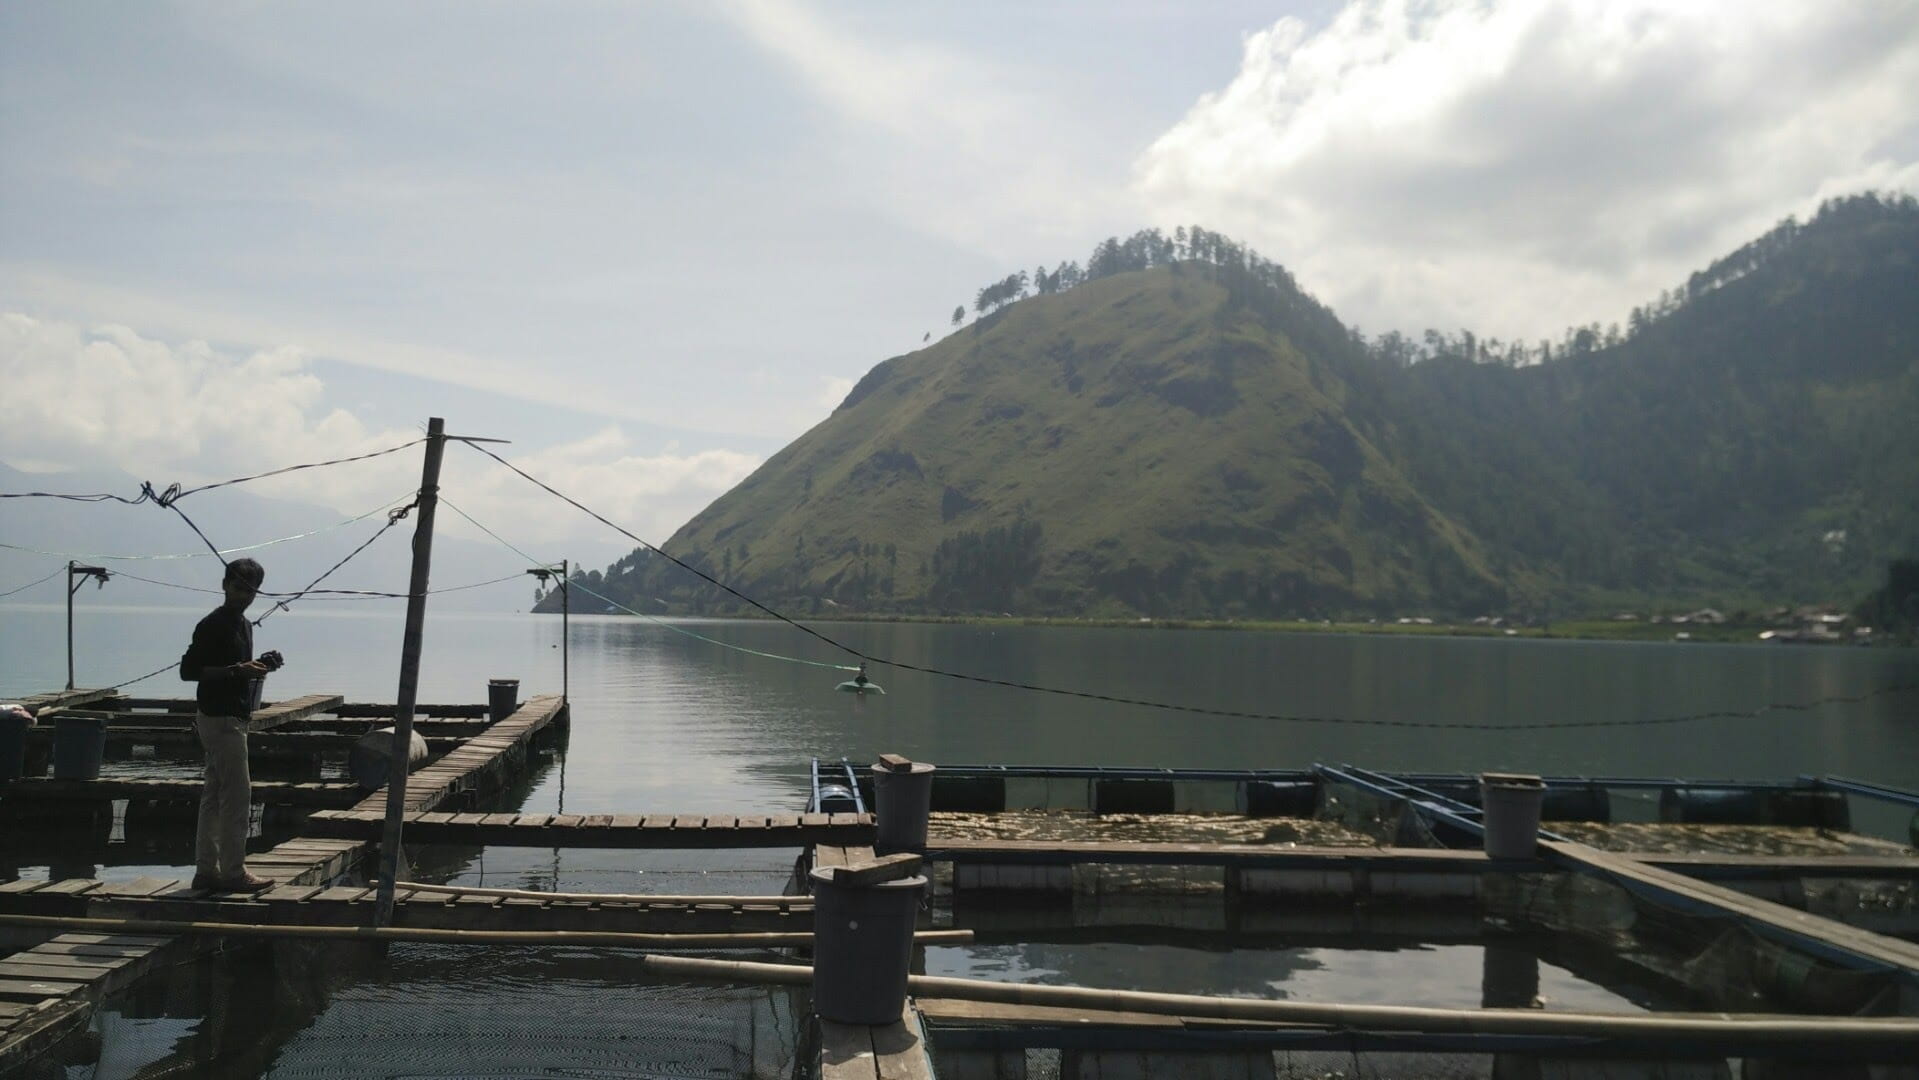 fish farm at a lake with mountains in the background